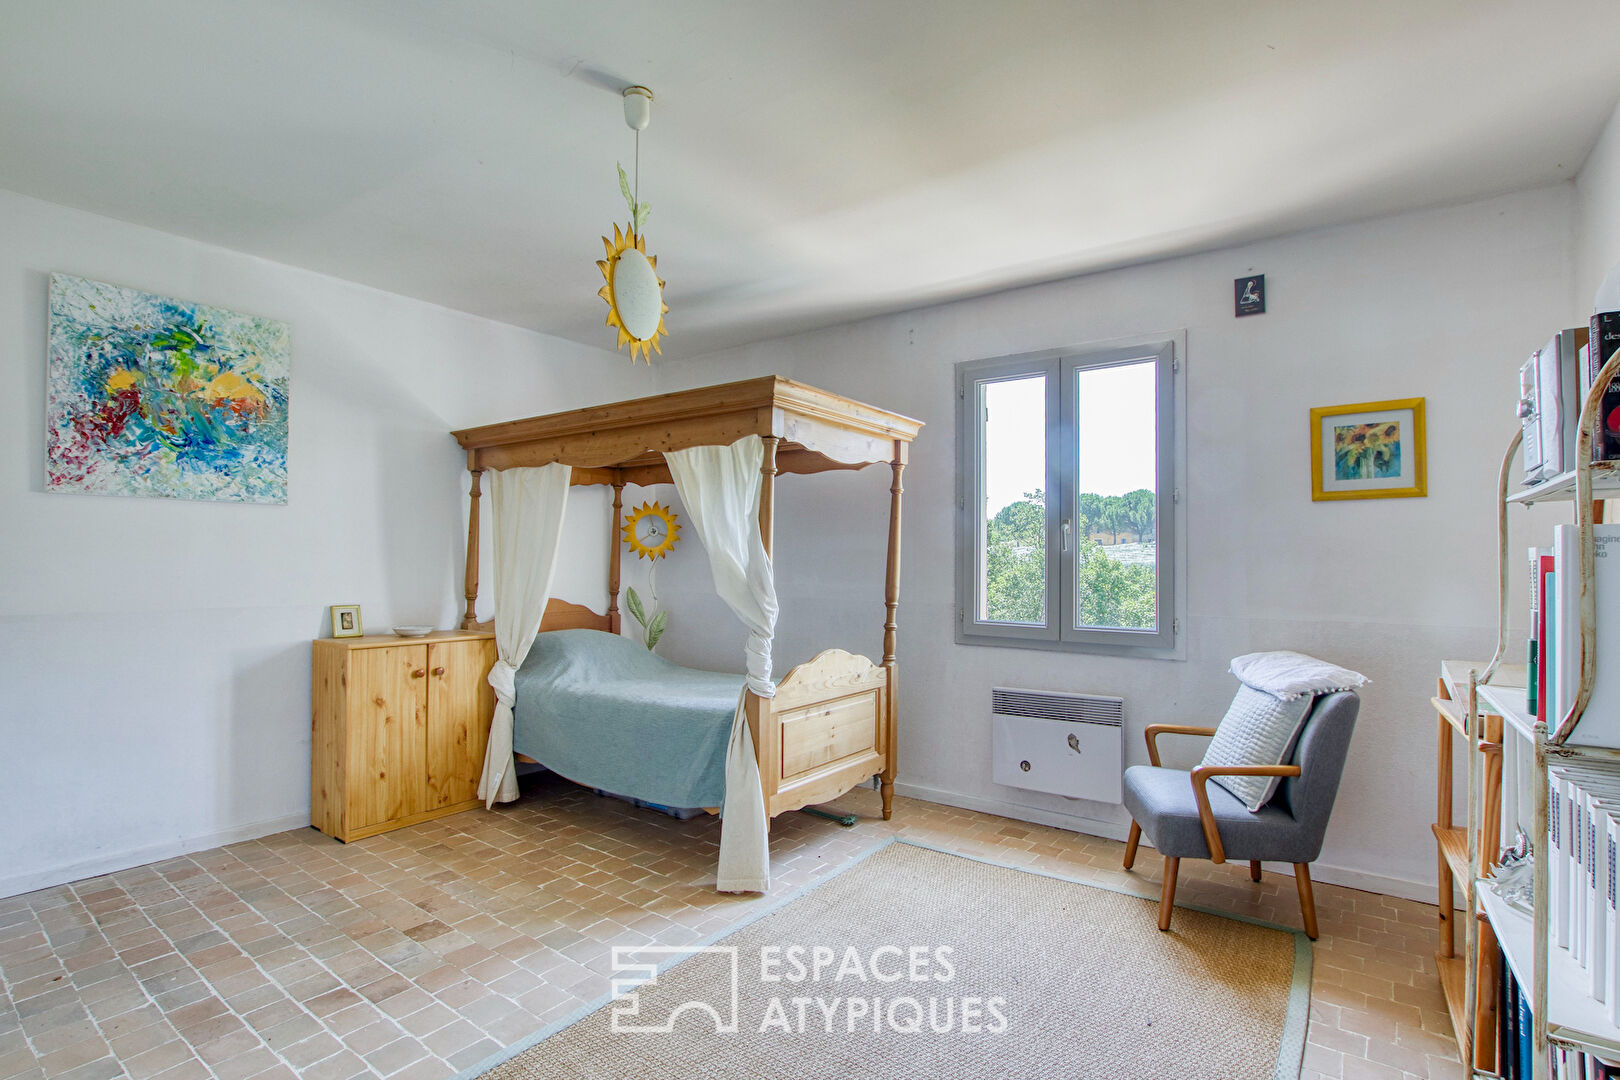 Modern bastide in the heart of orchards